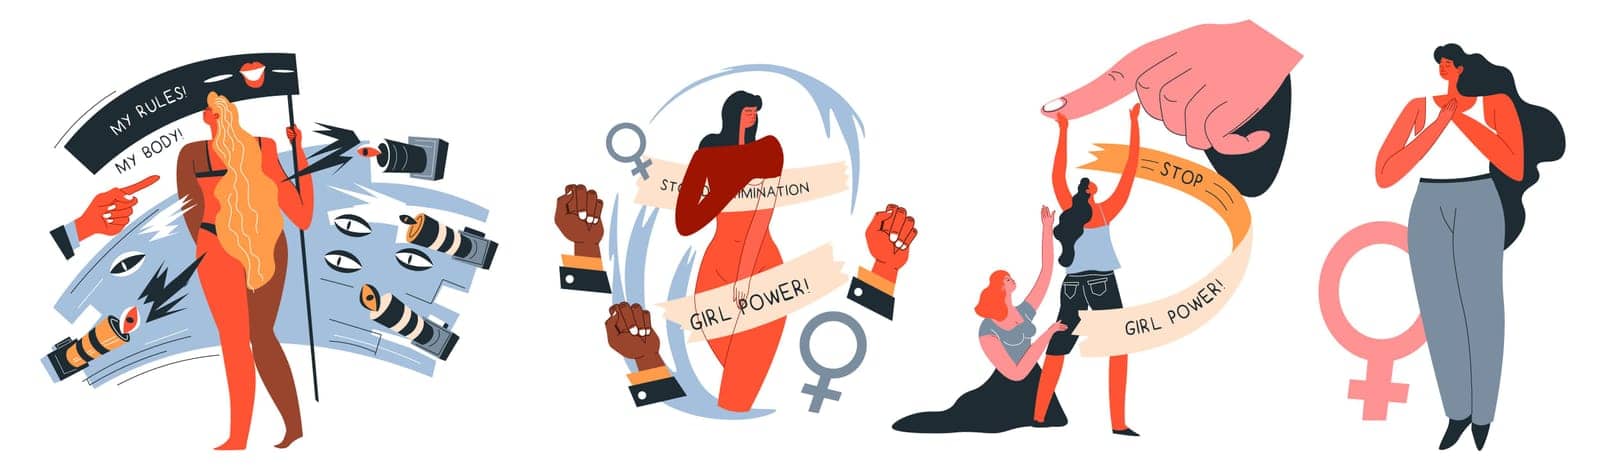 Feminism and empowerment, movement and equality by Sonulkaster